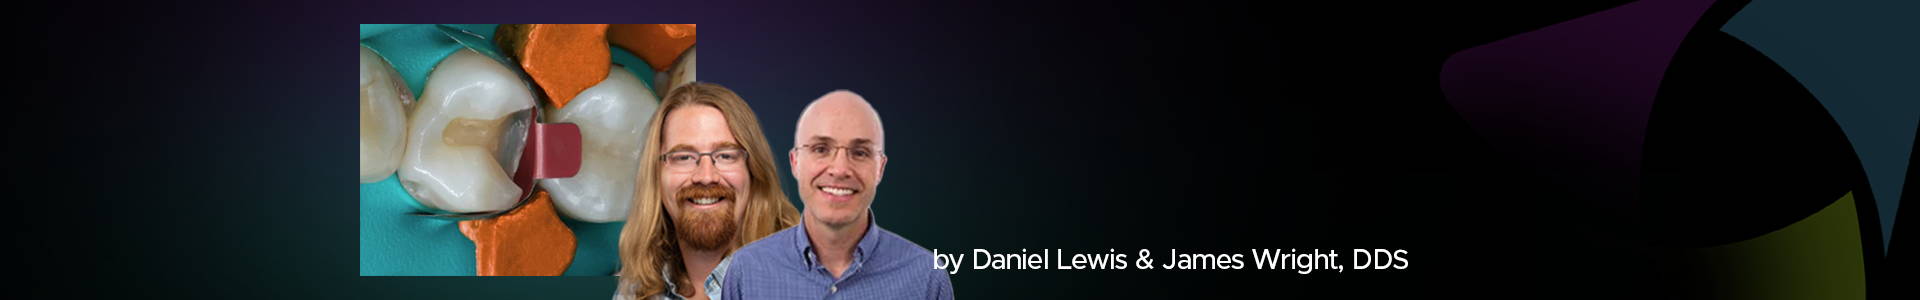 blog banner featuring Daniel Lewis, James Wright and a clinical image